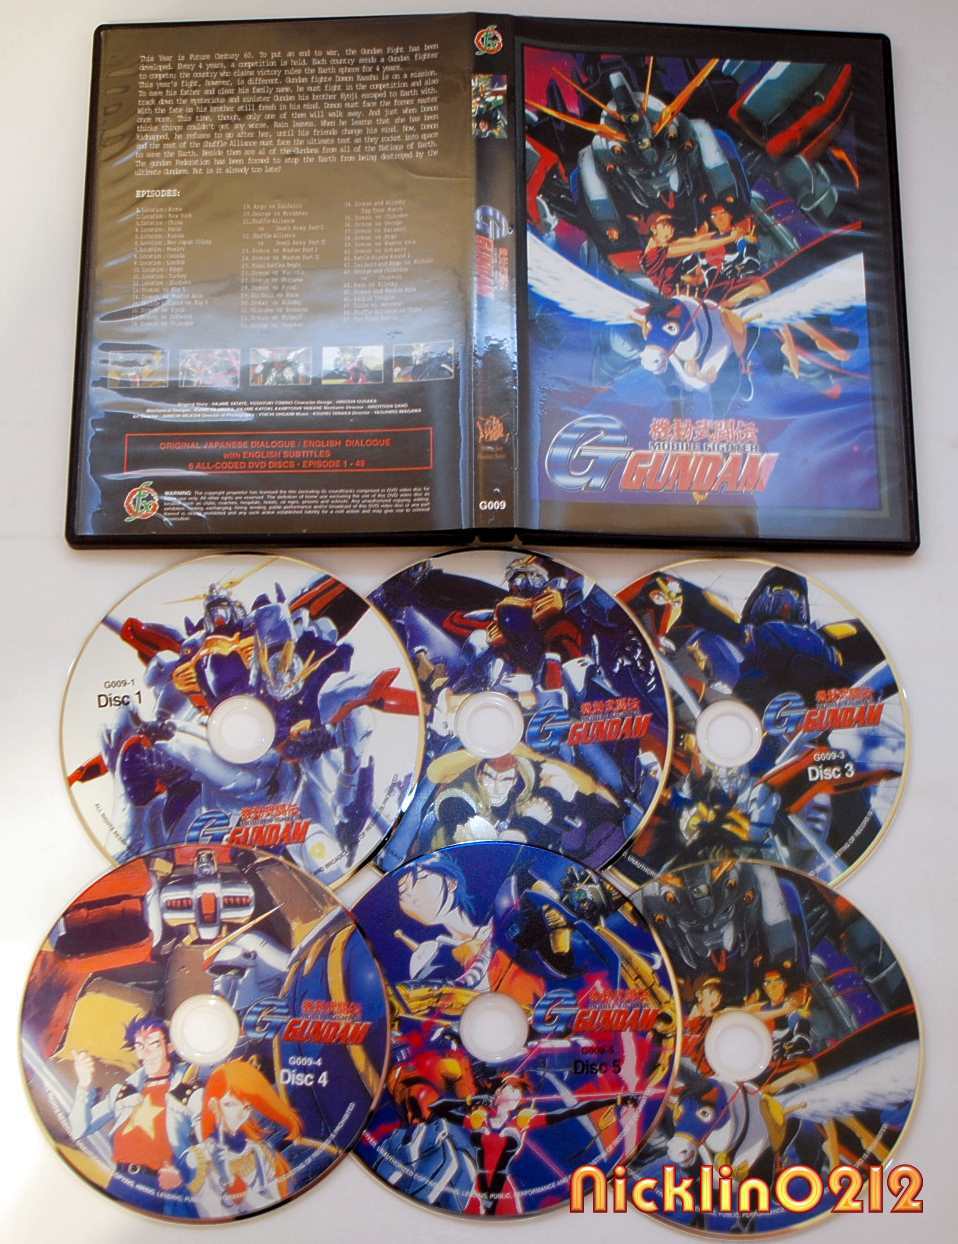 MOBILE FIGHTER G GUNDAM Complete 49 Episode NEW DVD English dub USA 6 DVDs